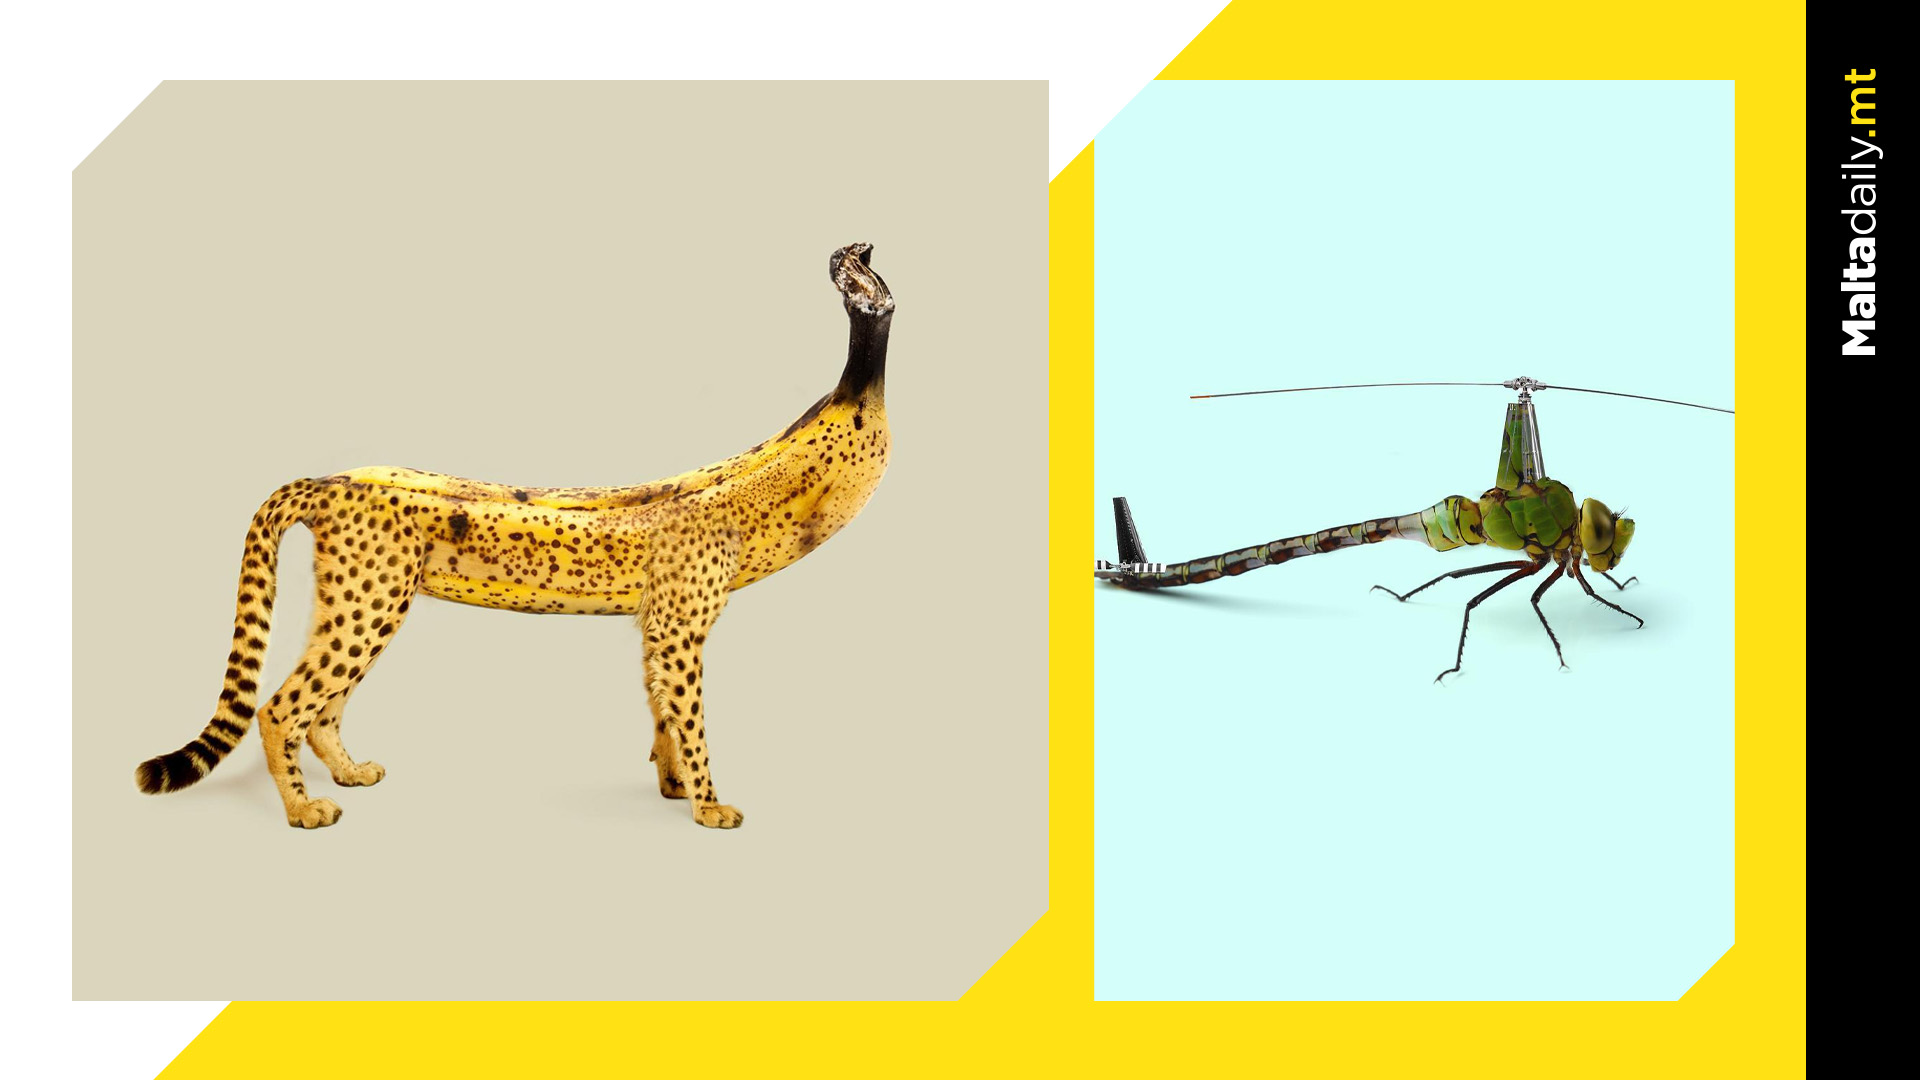 Animals & Everyday Objects Come Together in French Artists' Bizarre Project